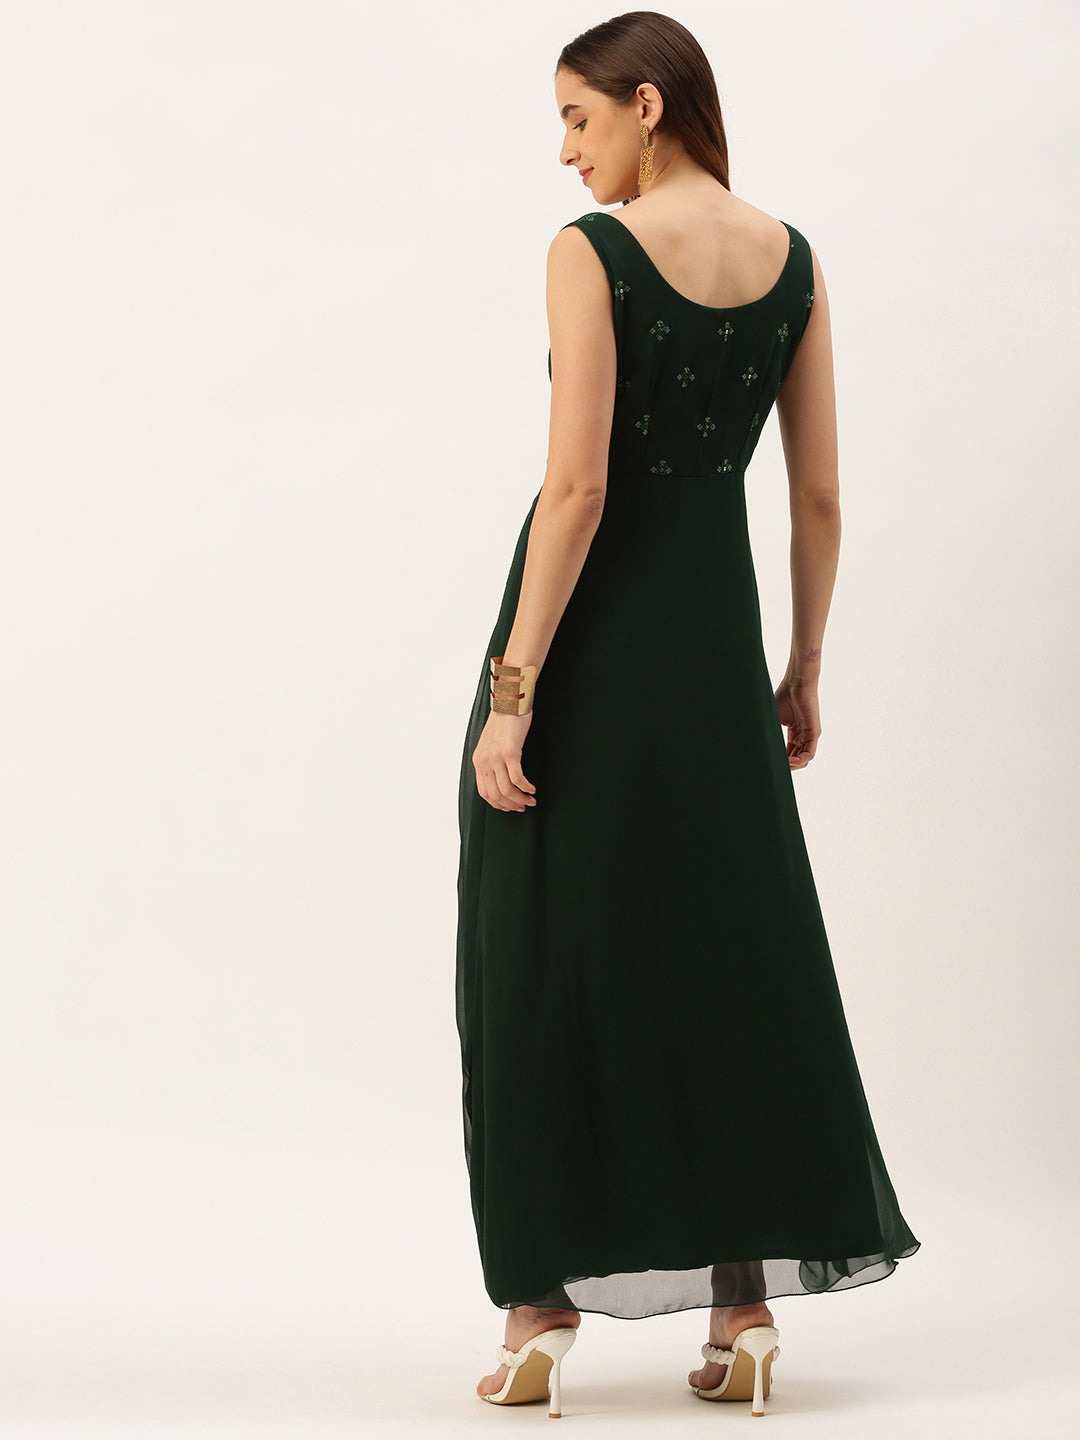 Green-Embroidered-Dress